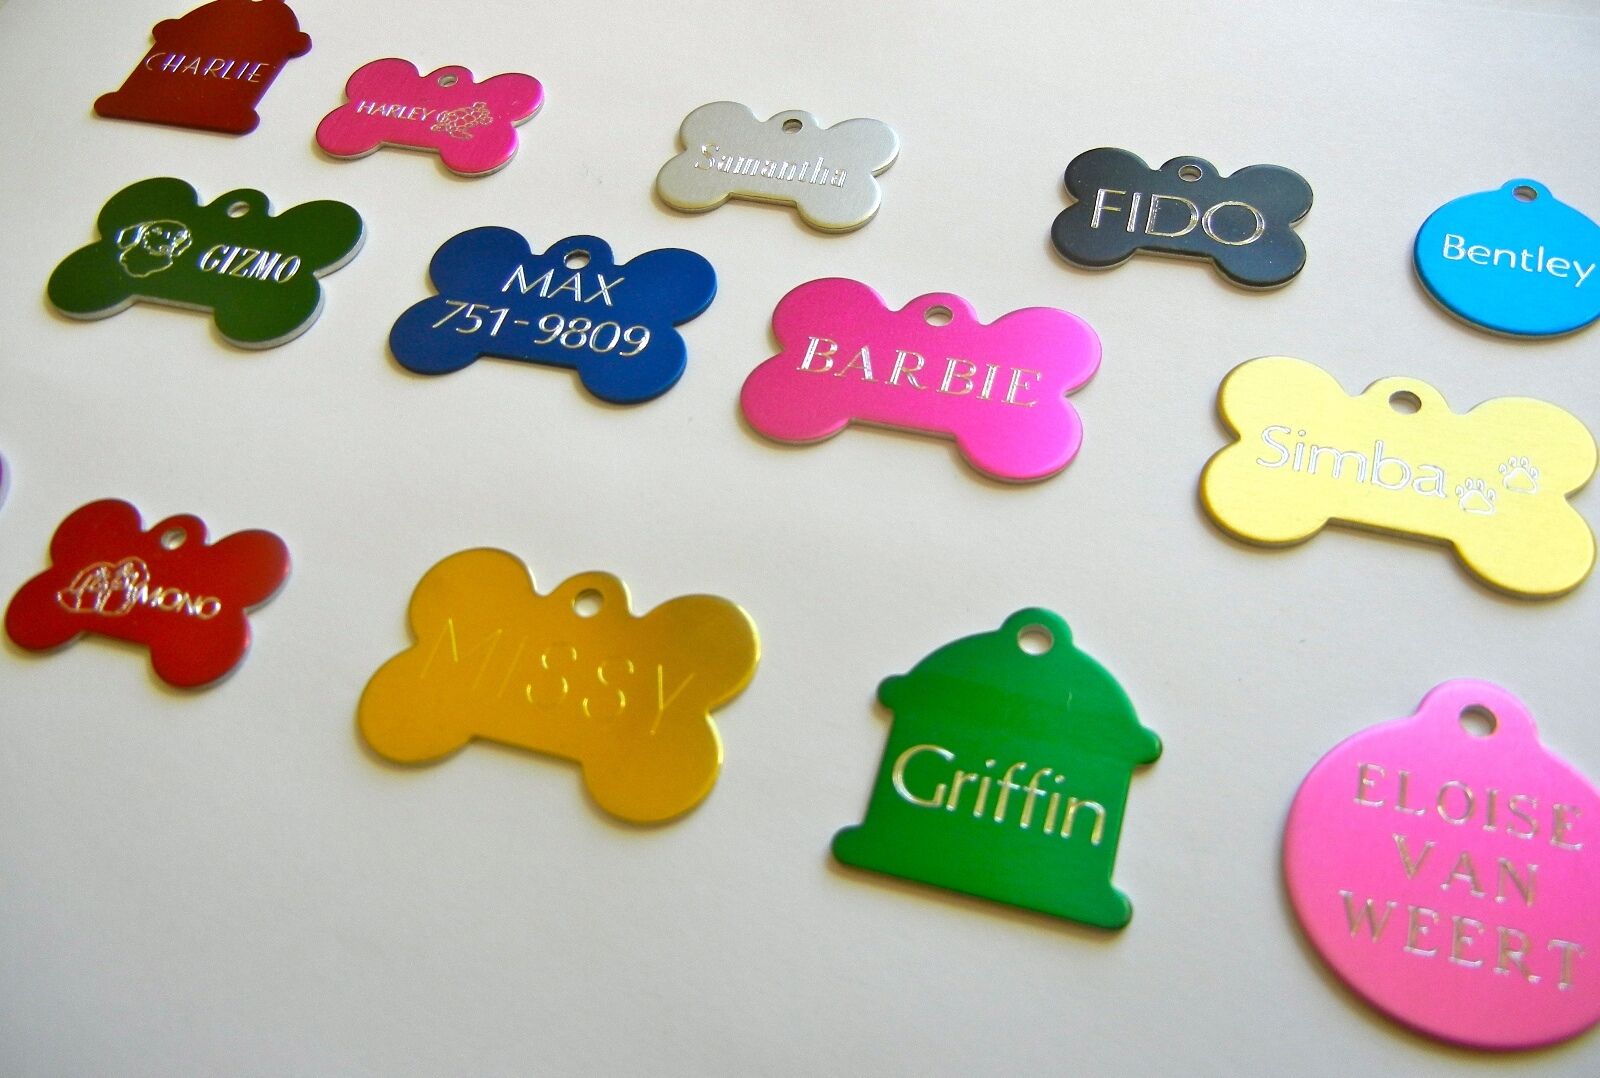 CUSTOM ENGRAVED PERSONALIZED PET TAG ID DOG CAT NAME TAGS DOUBLE SIDE Love Your Tag